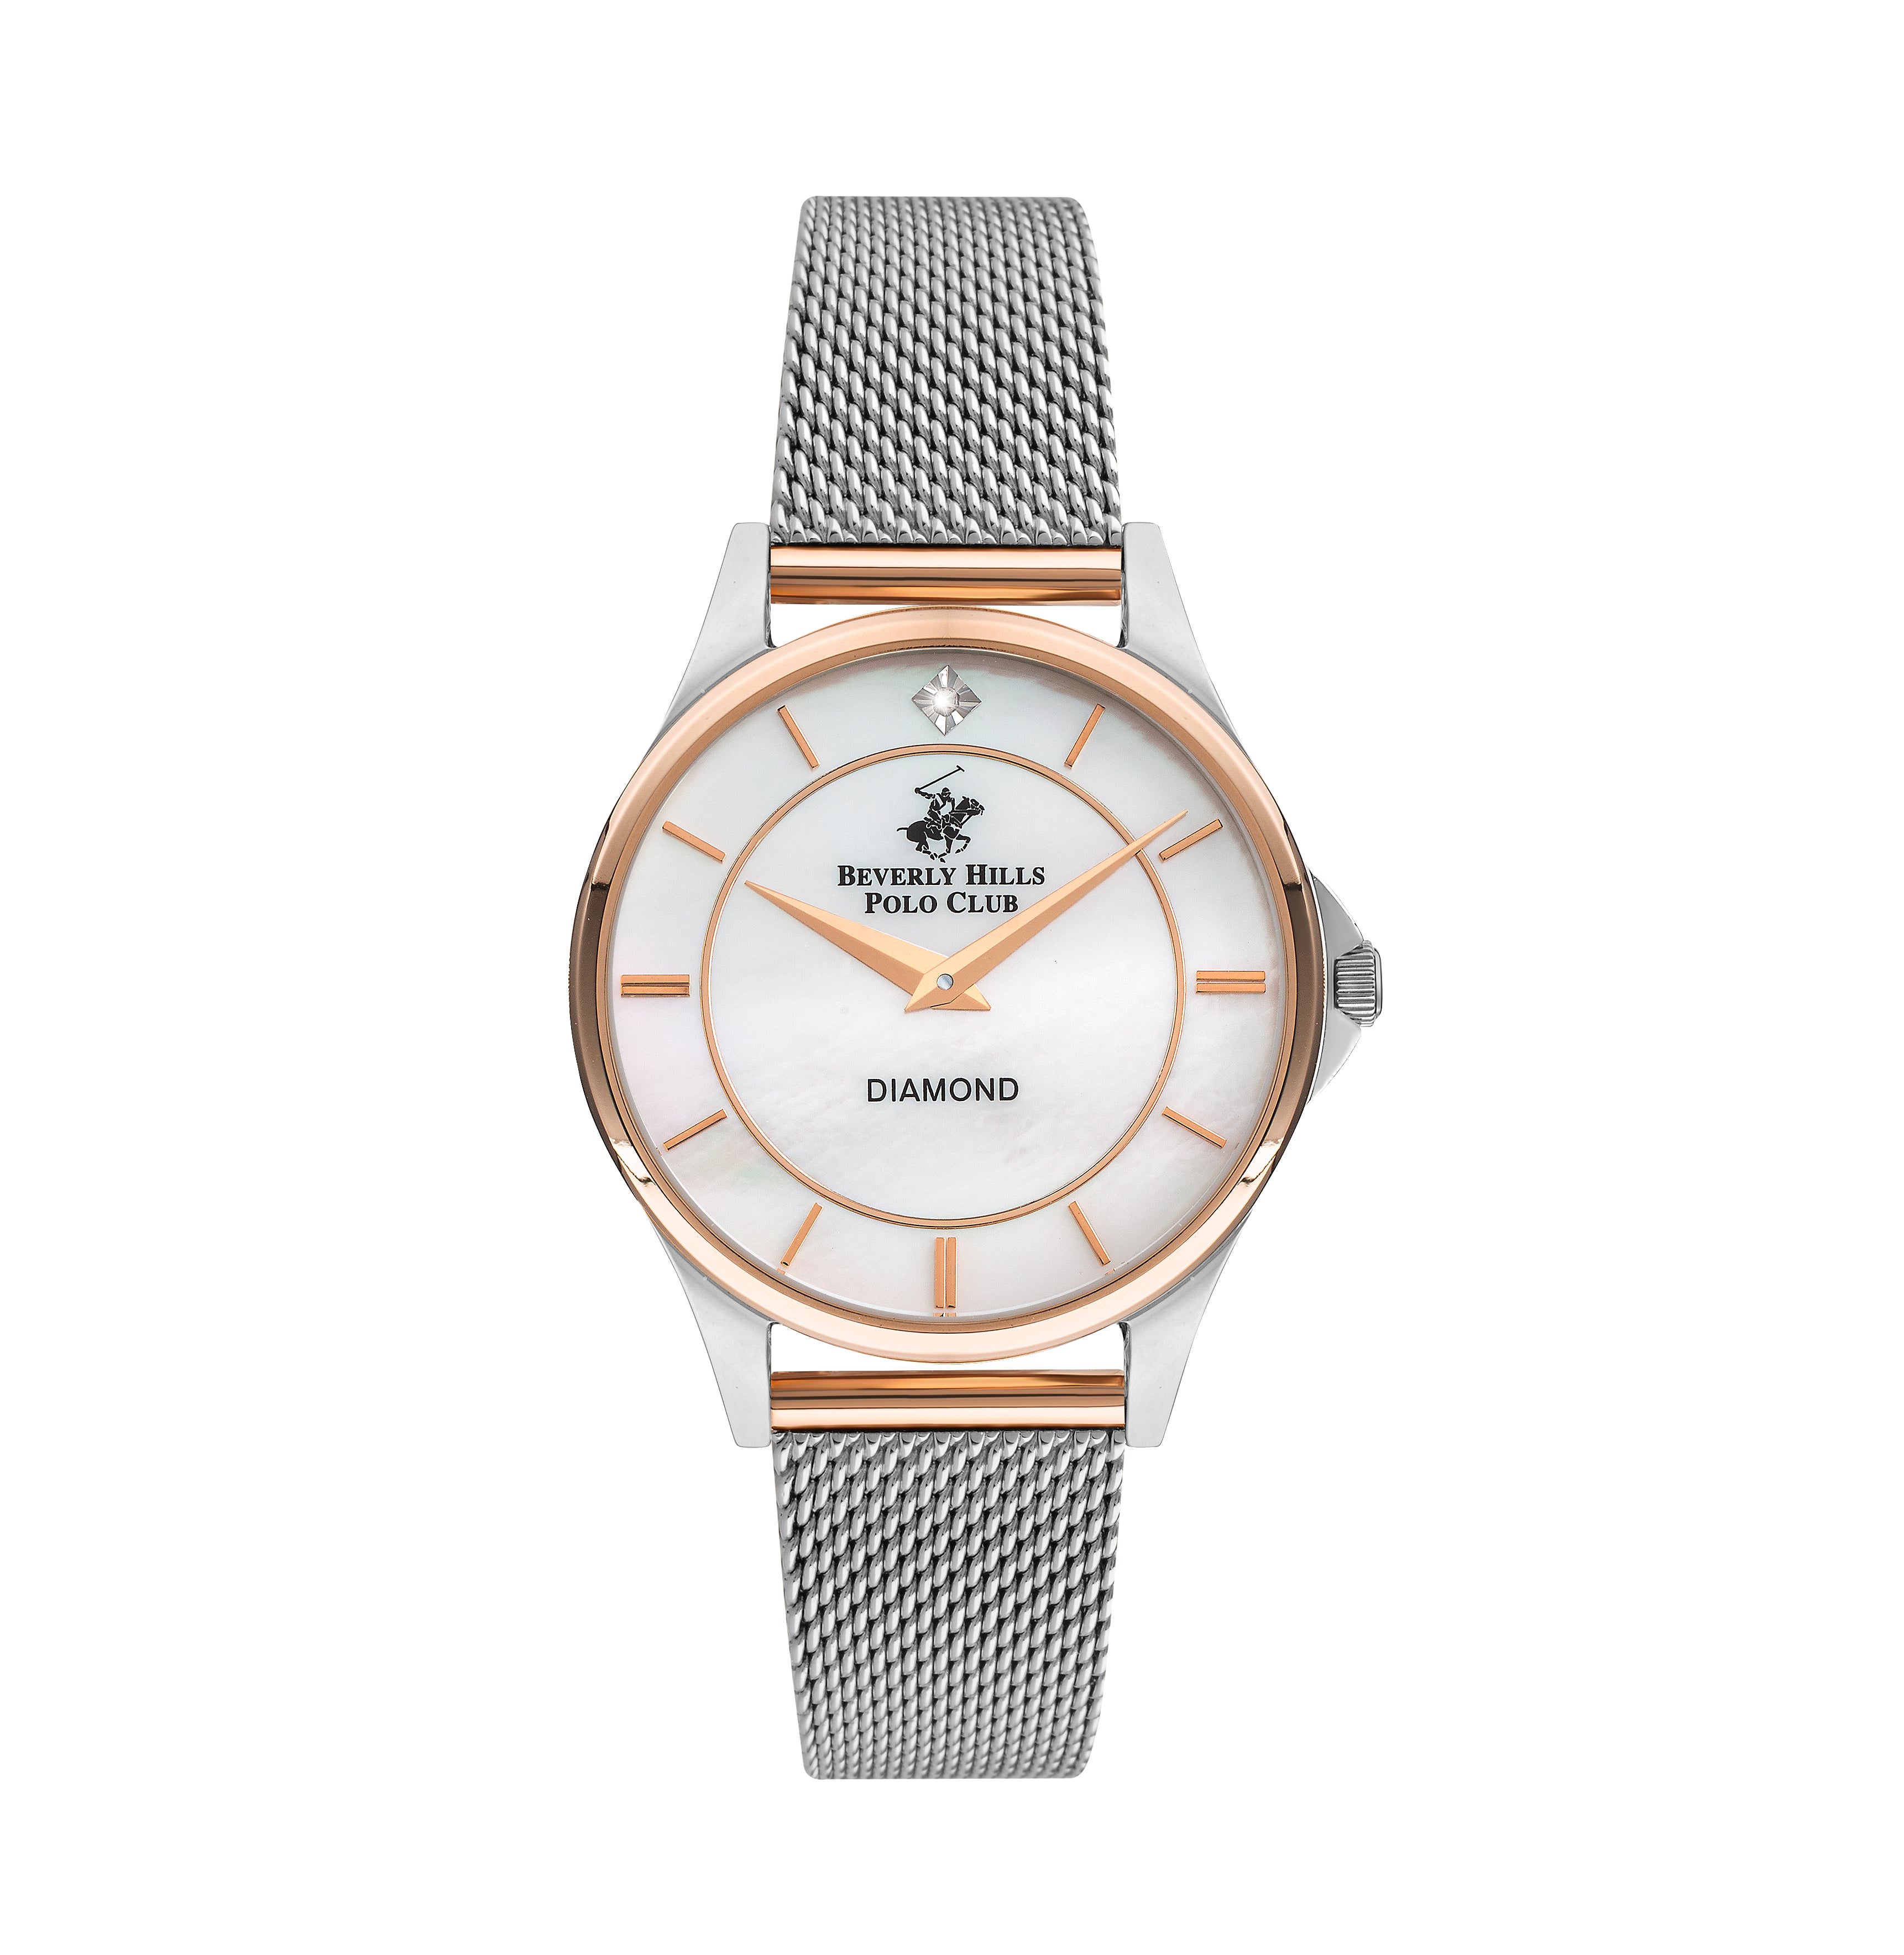 Polo - BP3242X.520 - Ladies Stainless Steel Watch